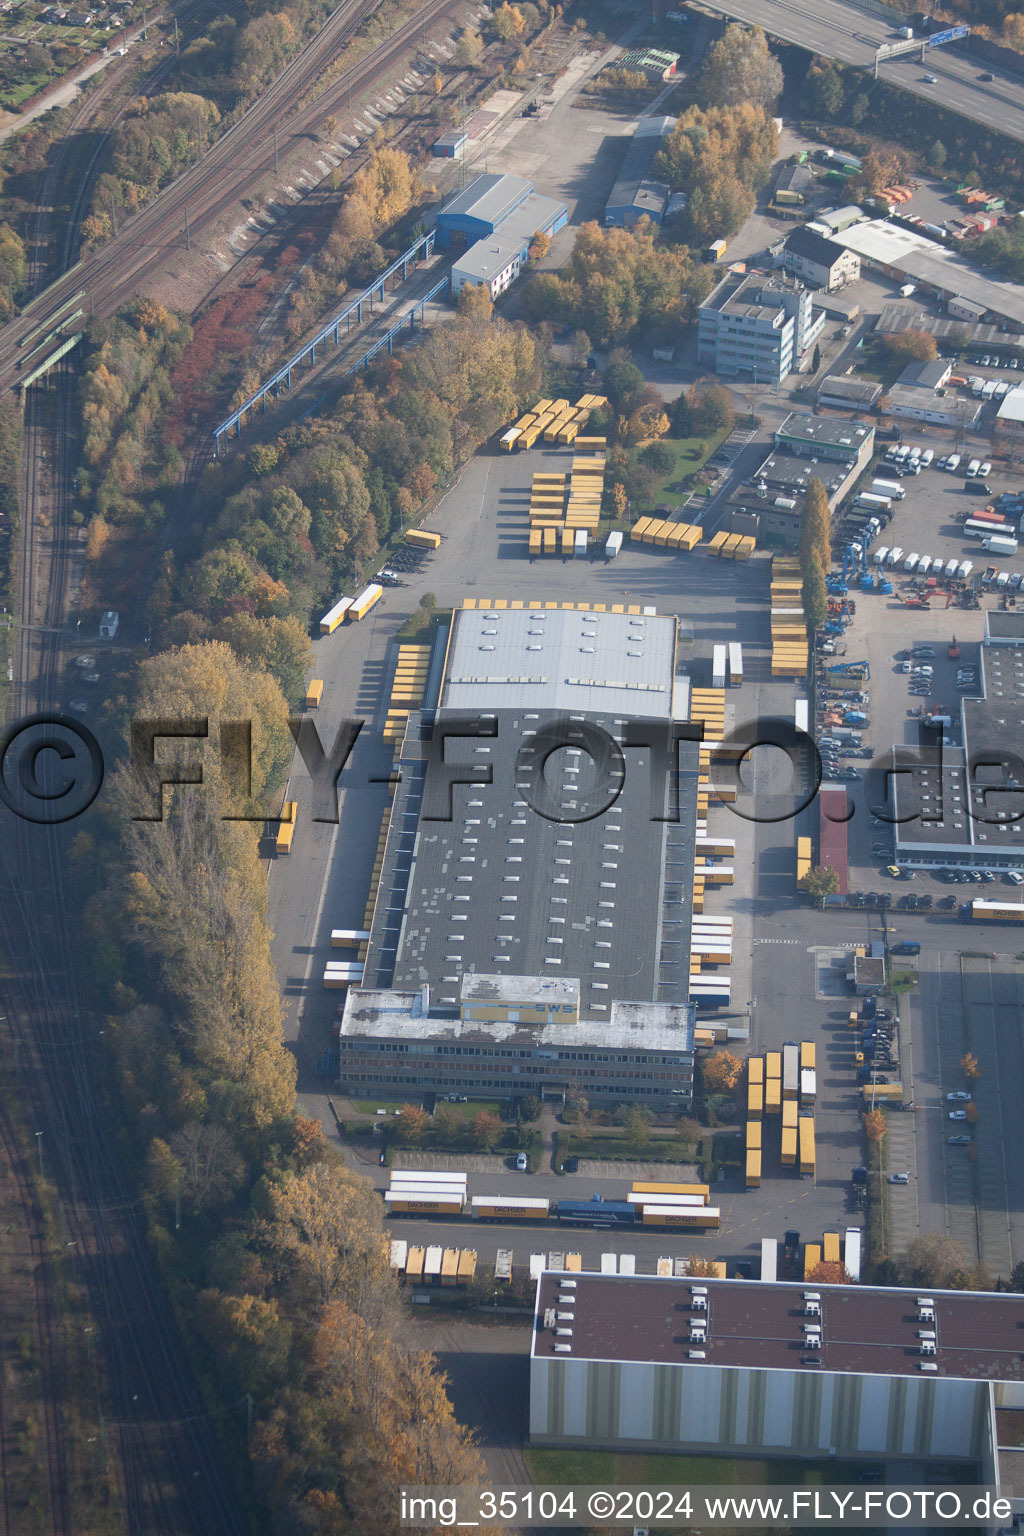 Warehouses and forwarding building SWS-Speditions-GmbH, Otto-street in the district Durlach in Karlsruhe in the state Baden-Wurttemberg seen from a drone